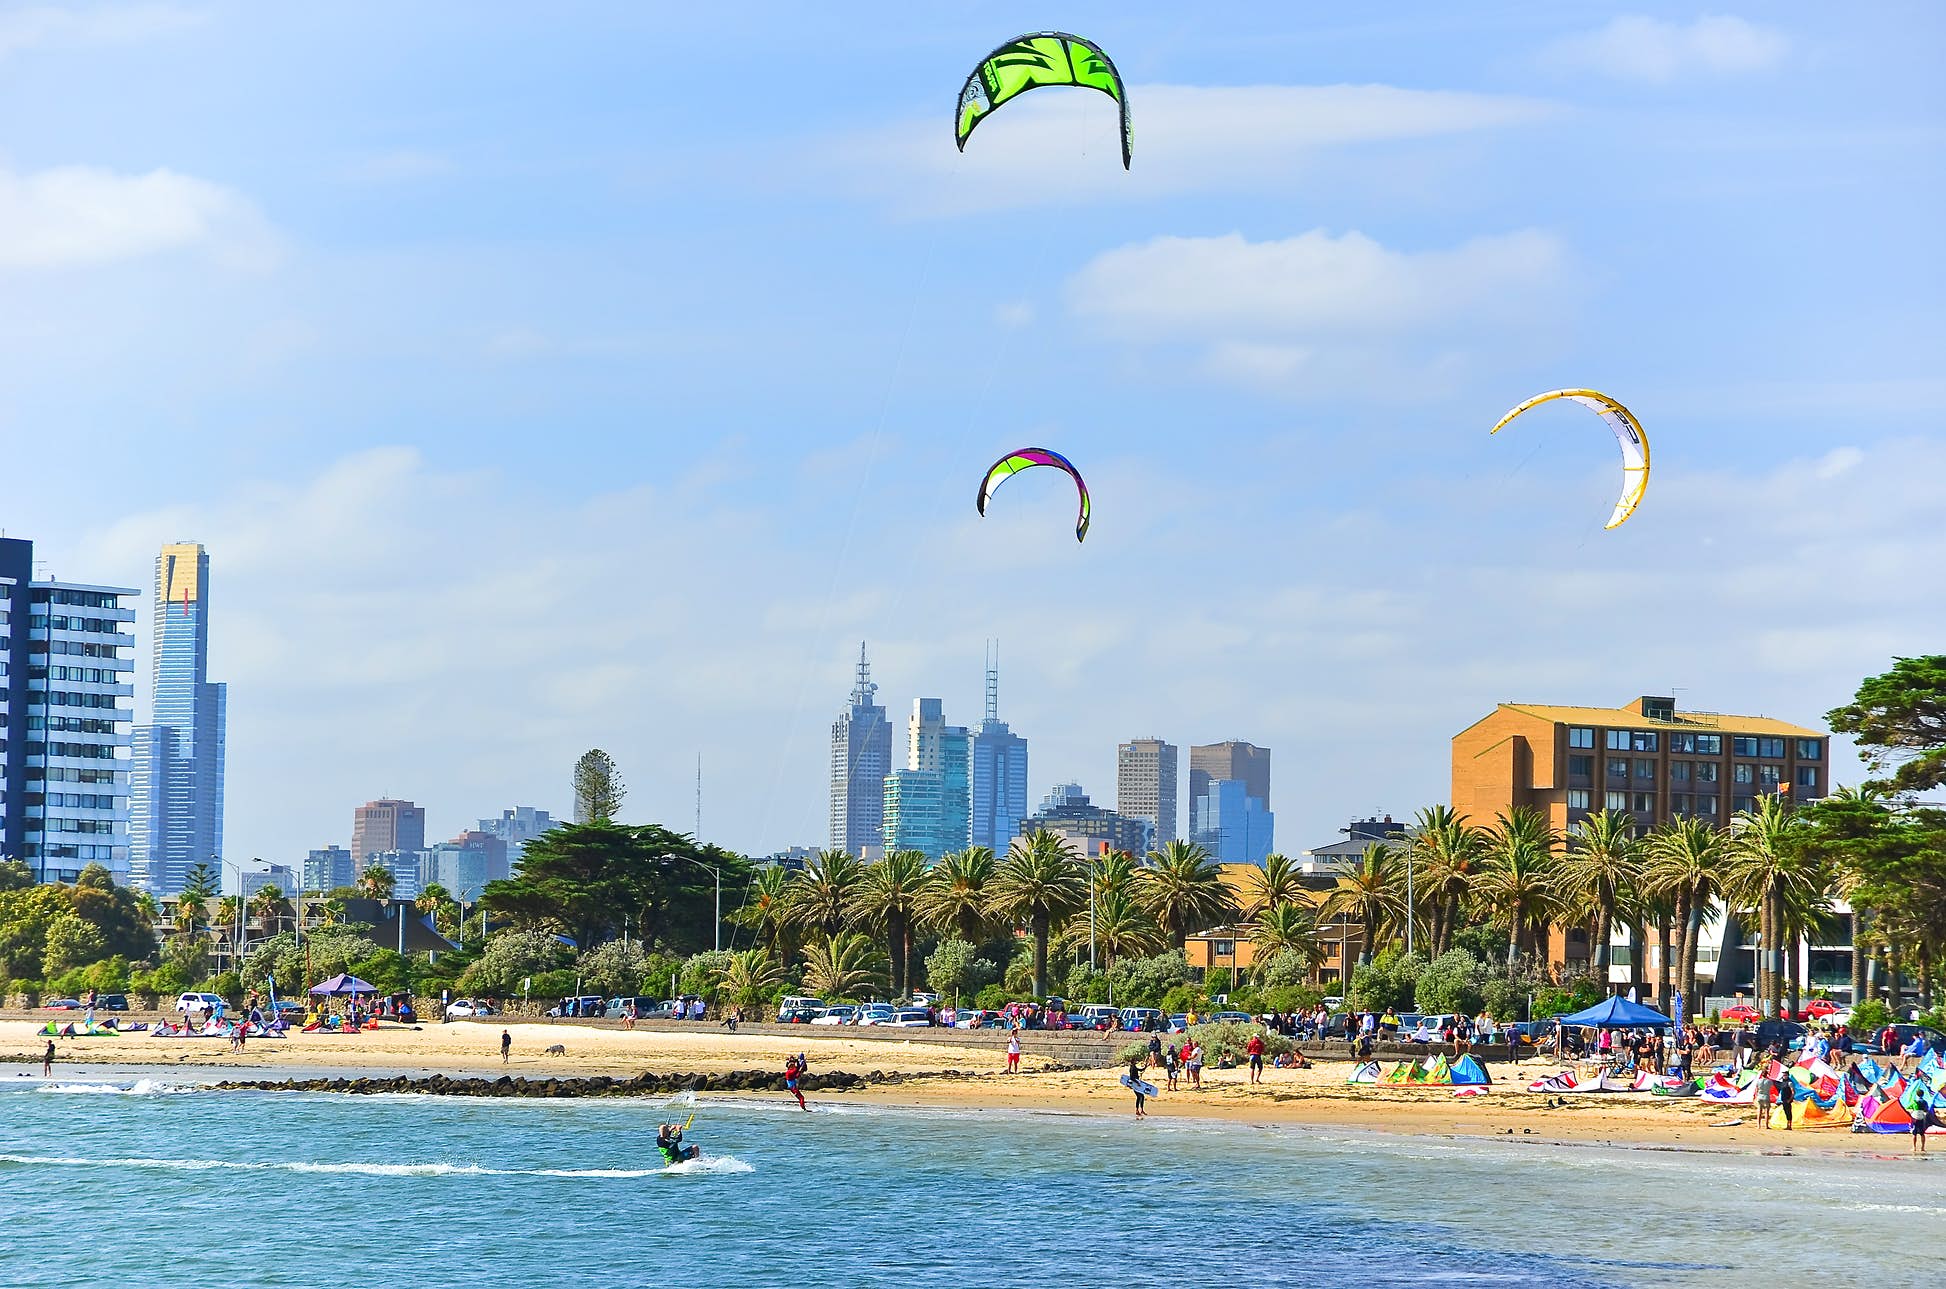 Popular holiday hotspots like St Kilda Beach in Melbourne may only see domestic tourists this year ©Javen/Shutterstock